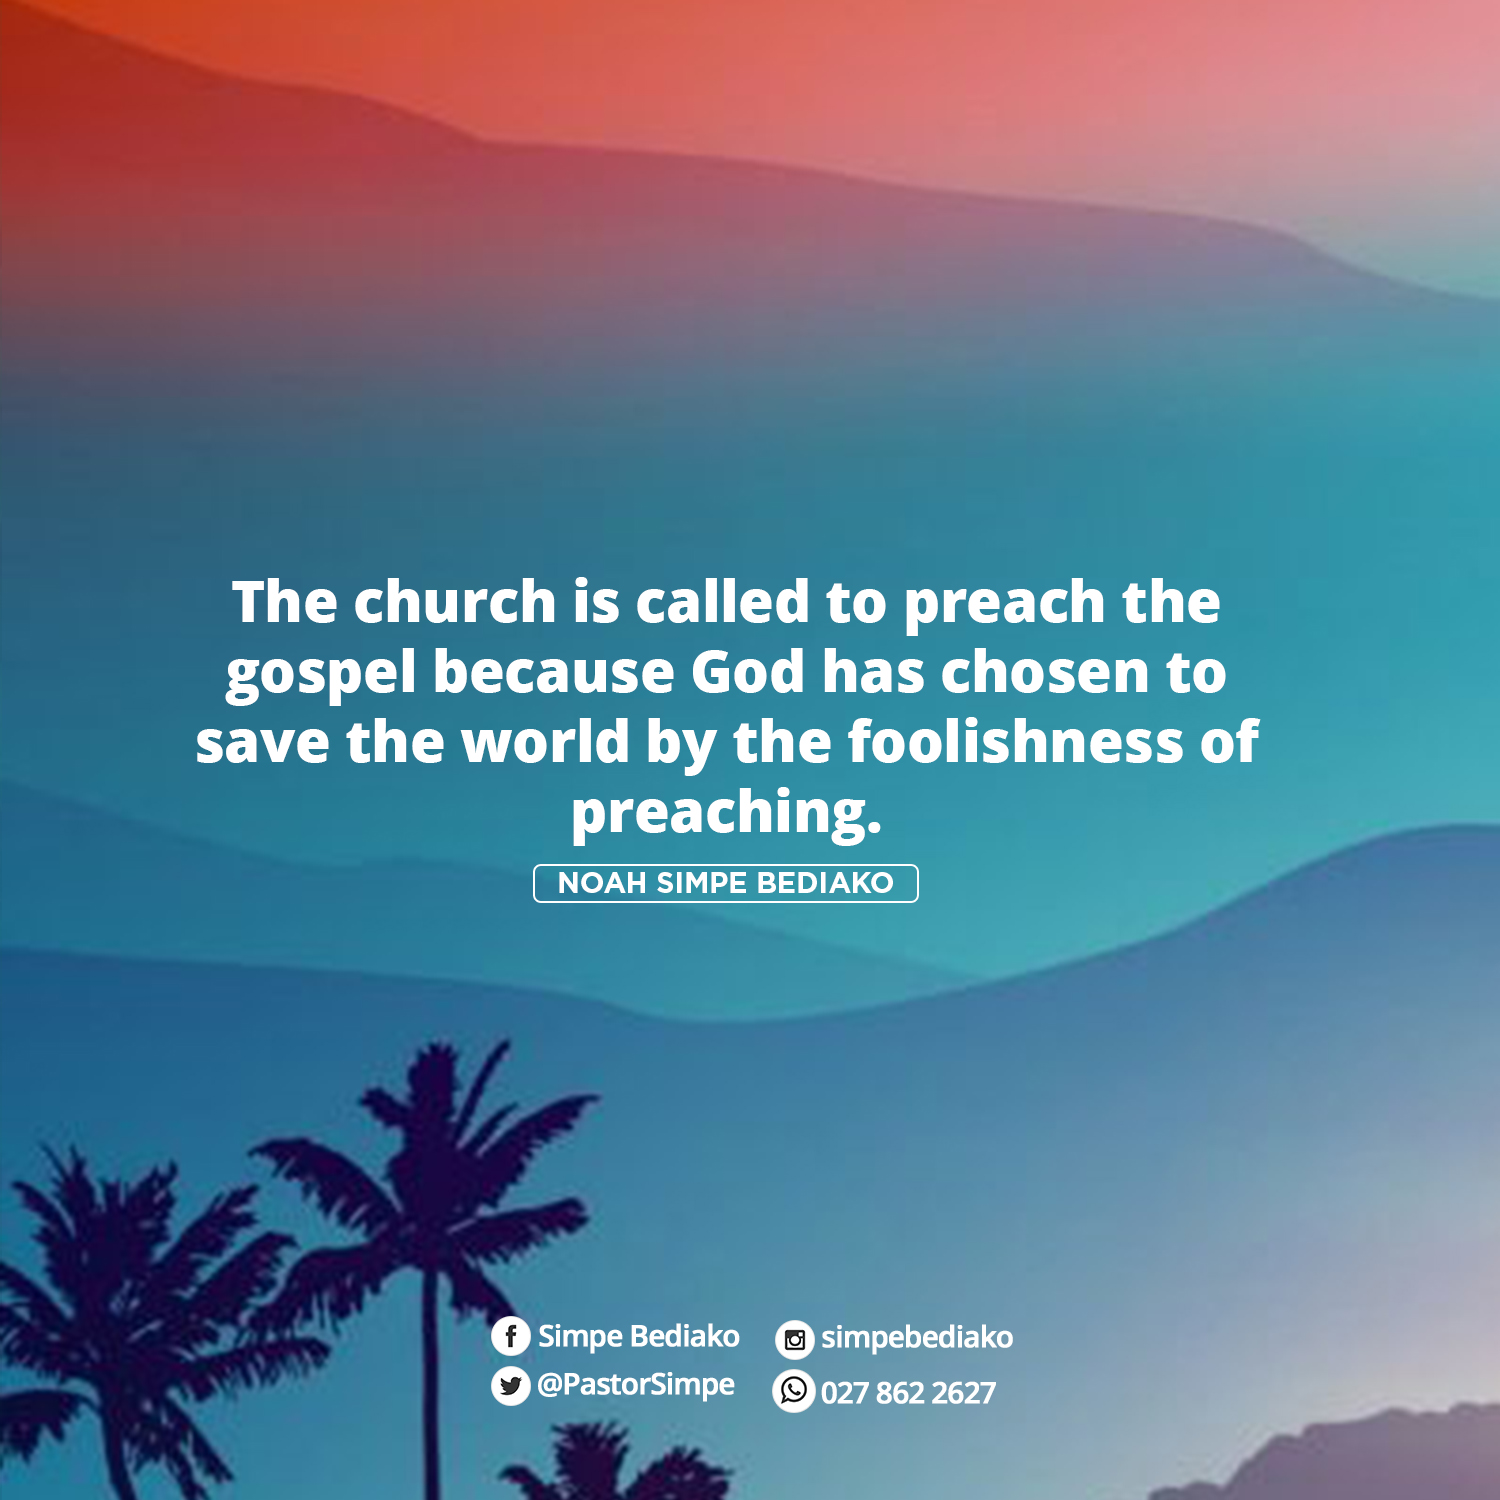 The church is called to preach the gospel because God has chosen to save the world by the foolishness of preaching.